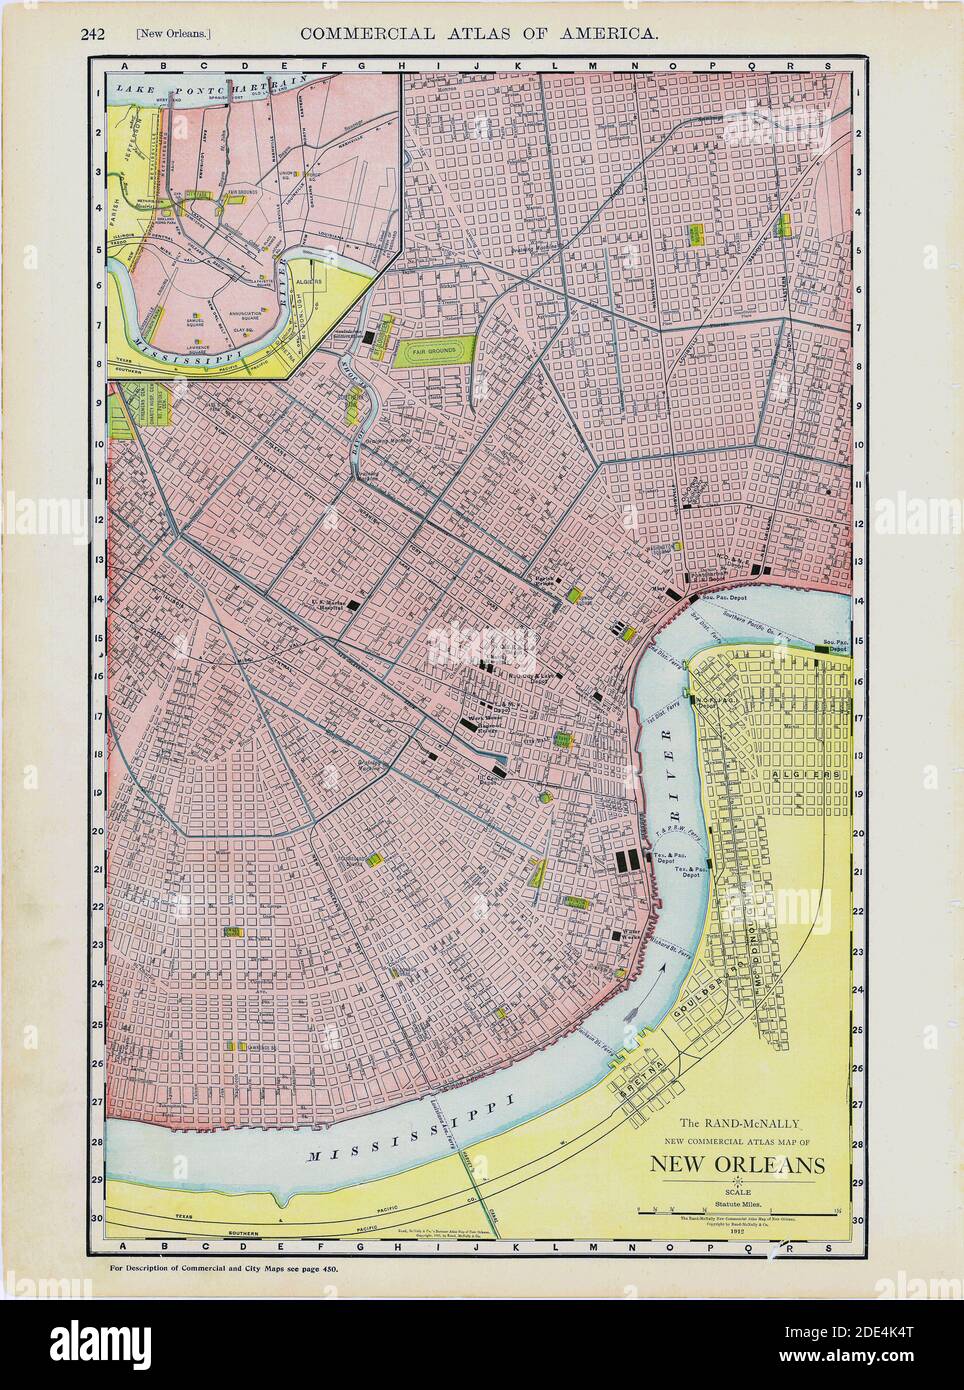 1912-1913 Vintage New Orleans mappa Foto Stock